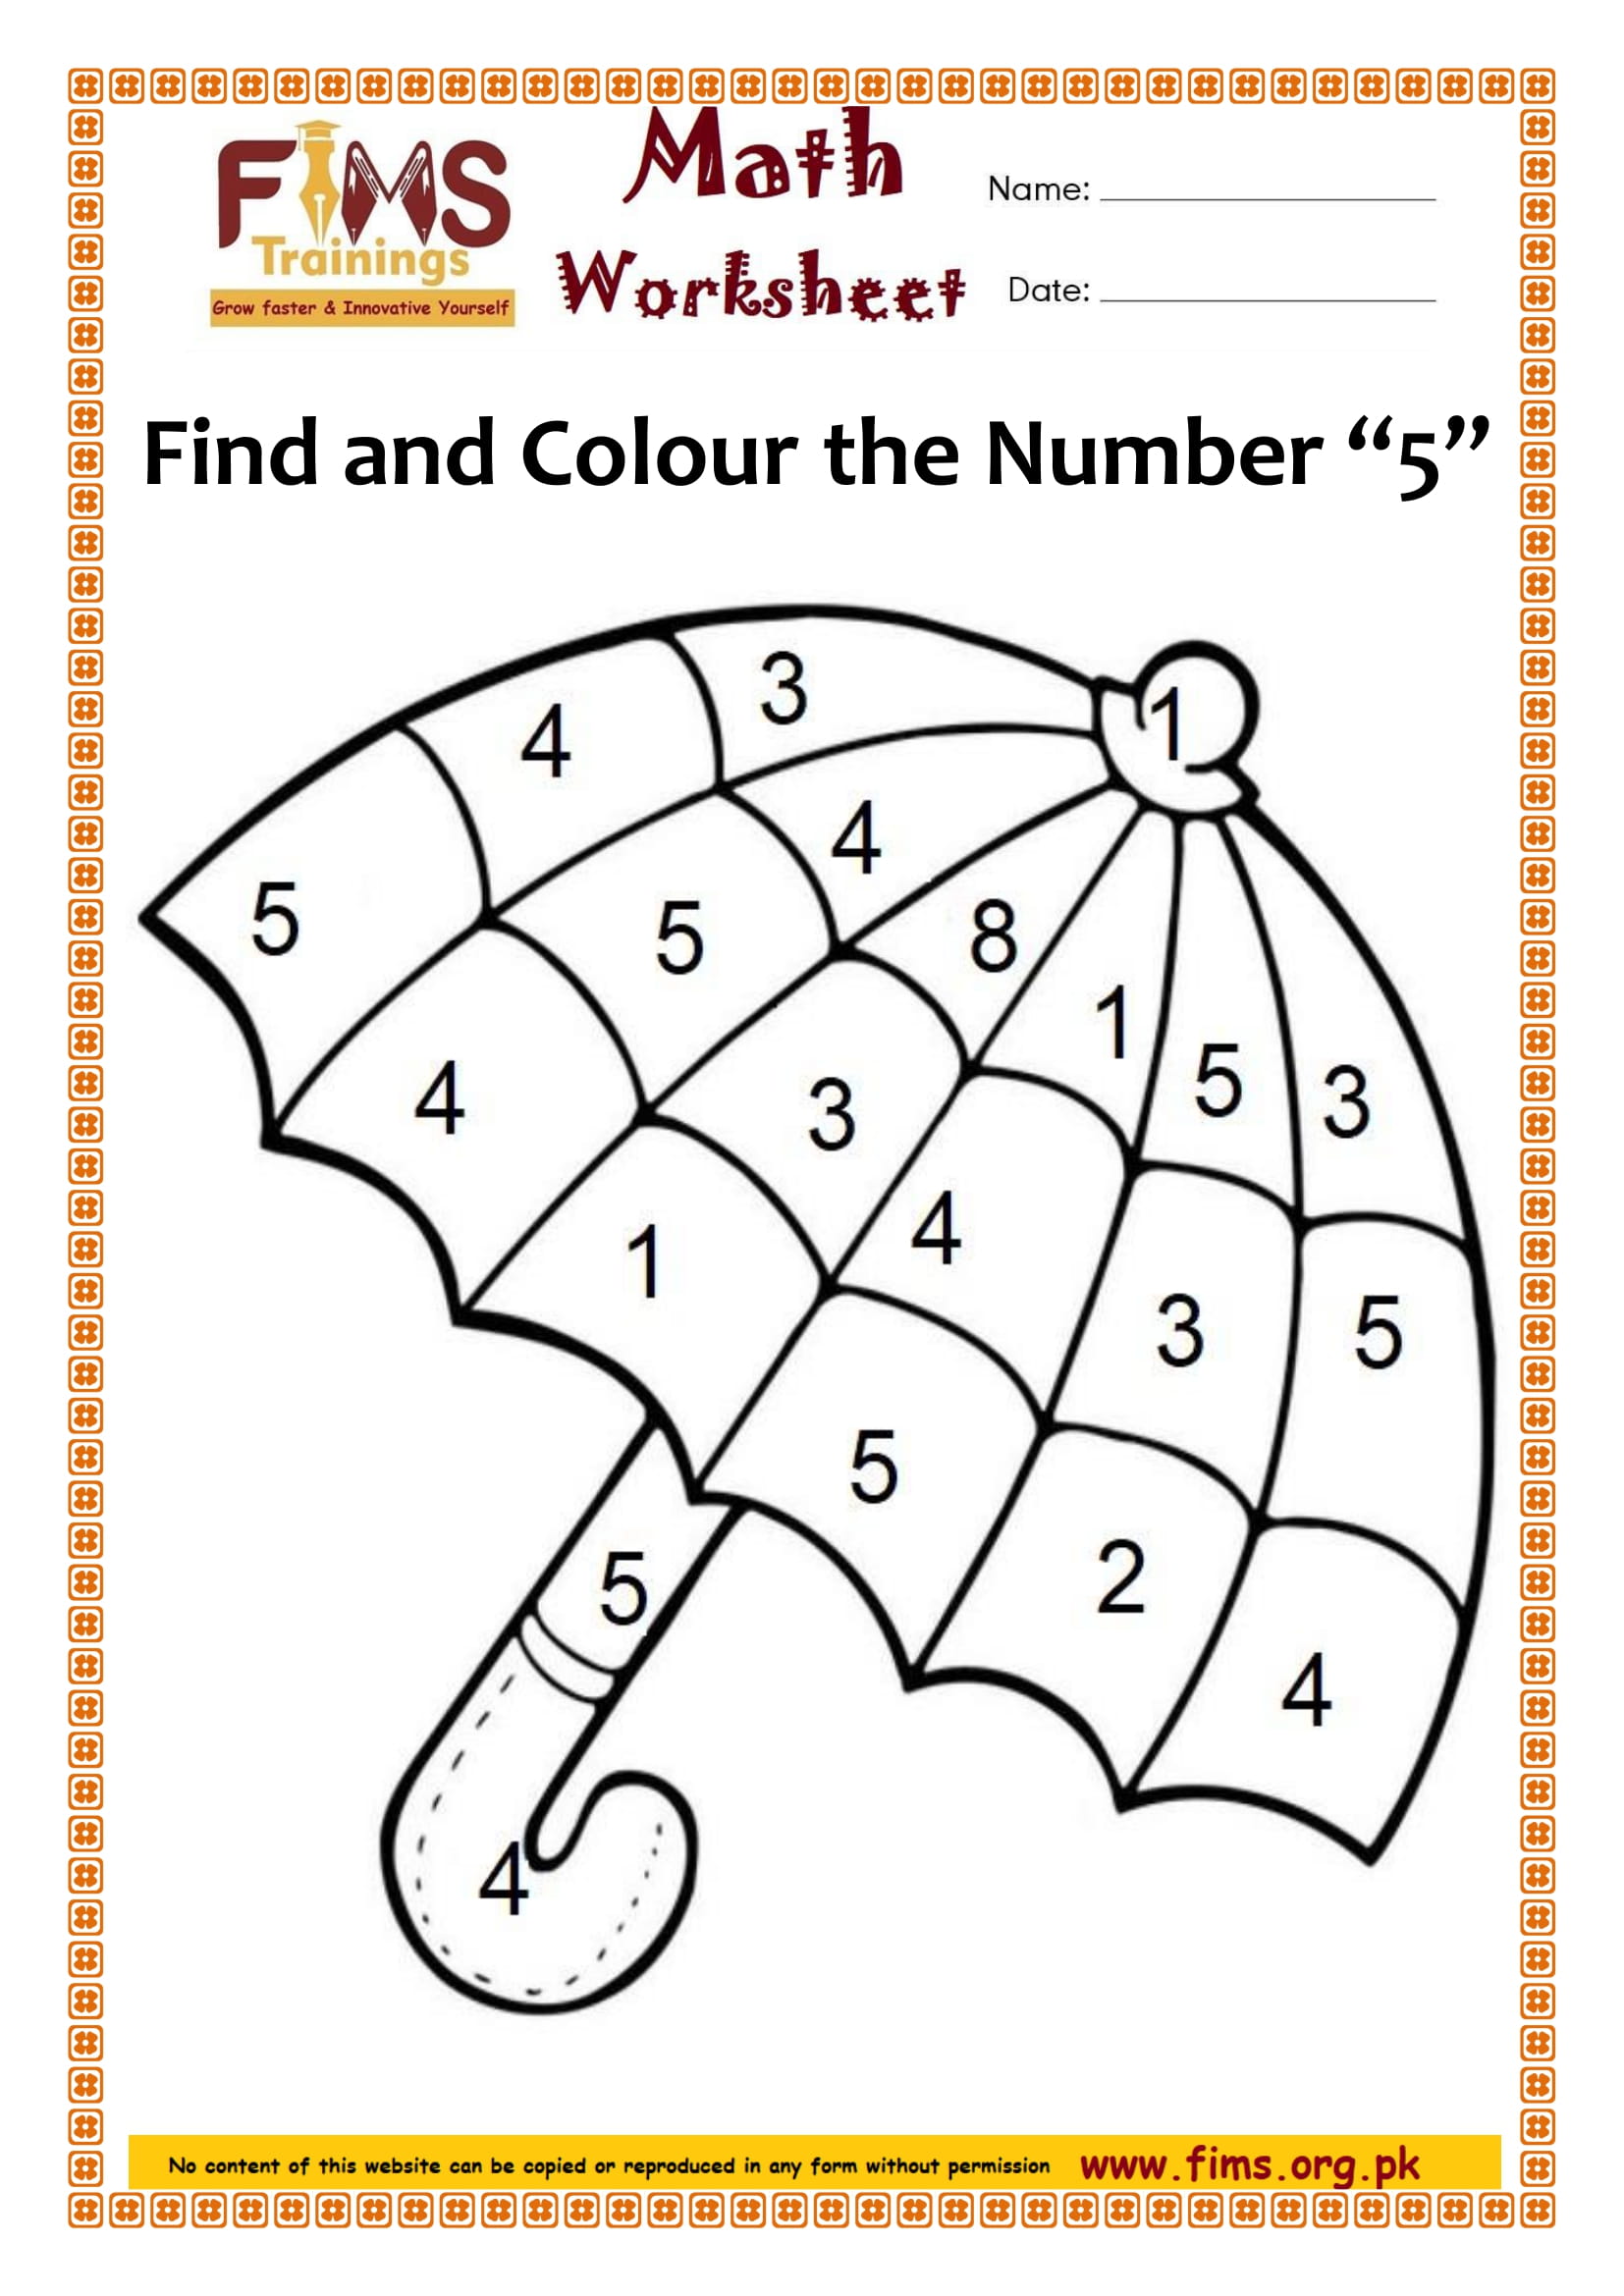 Find and Colour the Number “5” - Free Printable Worksheets- Download Pdf